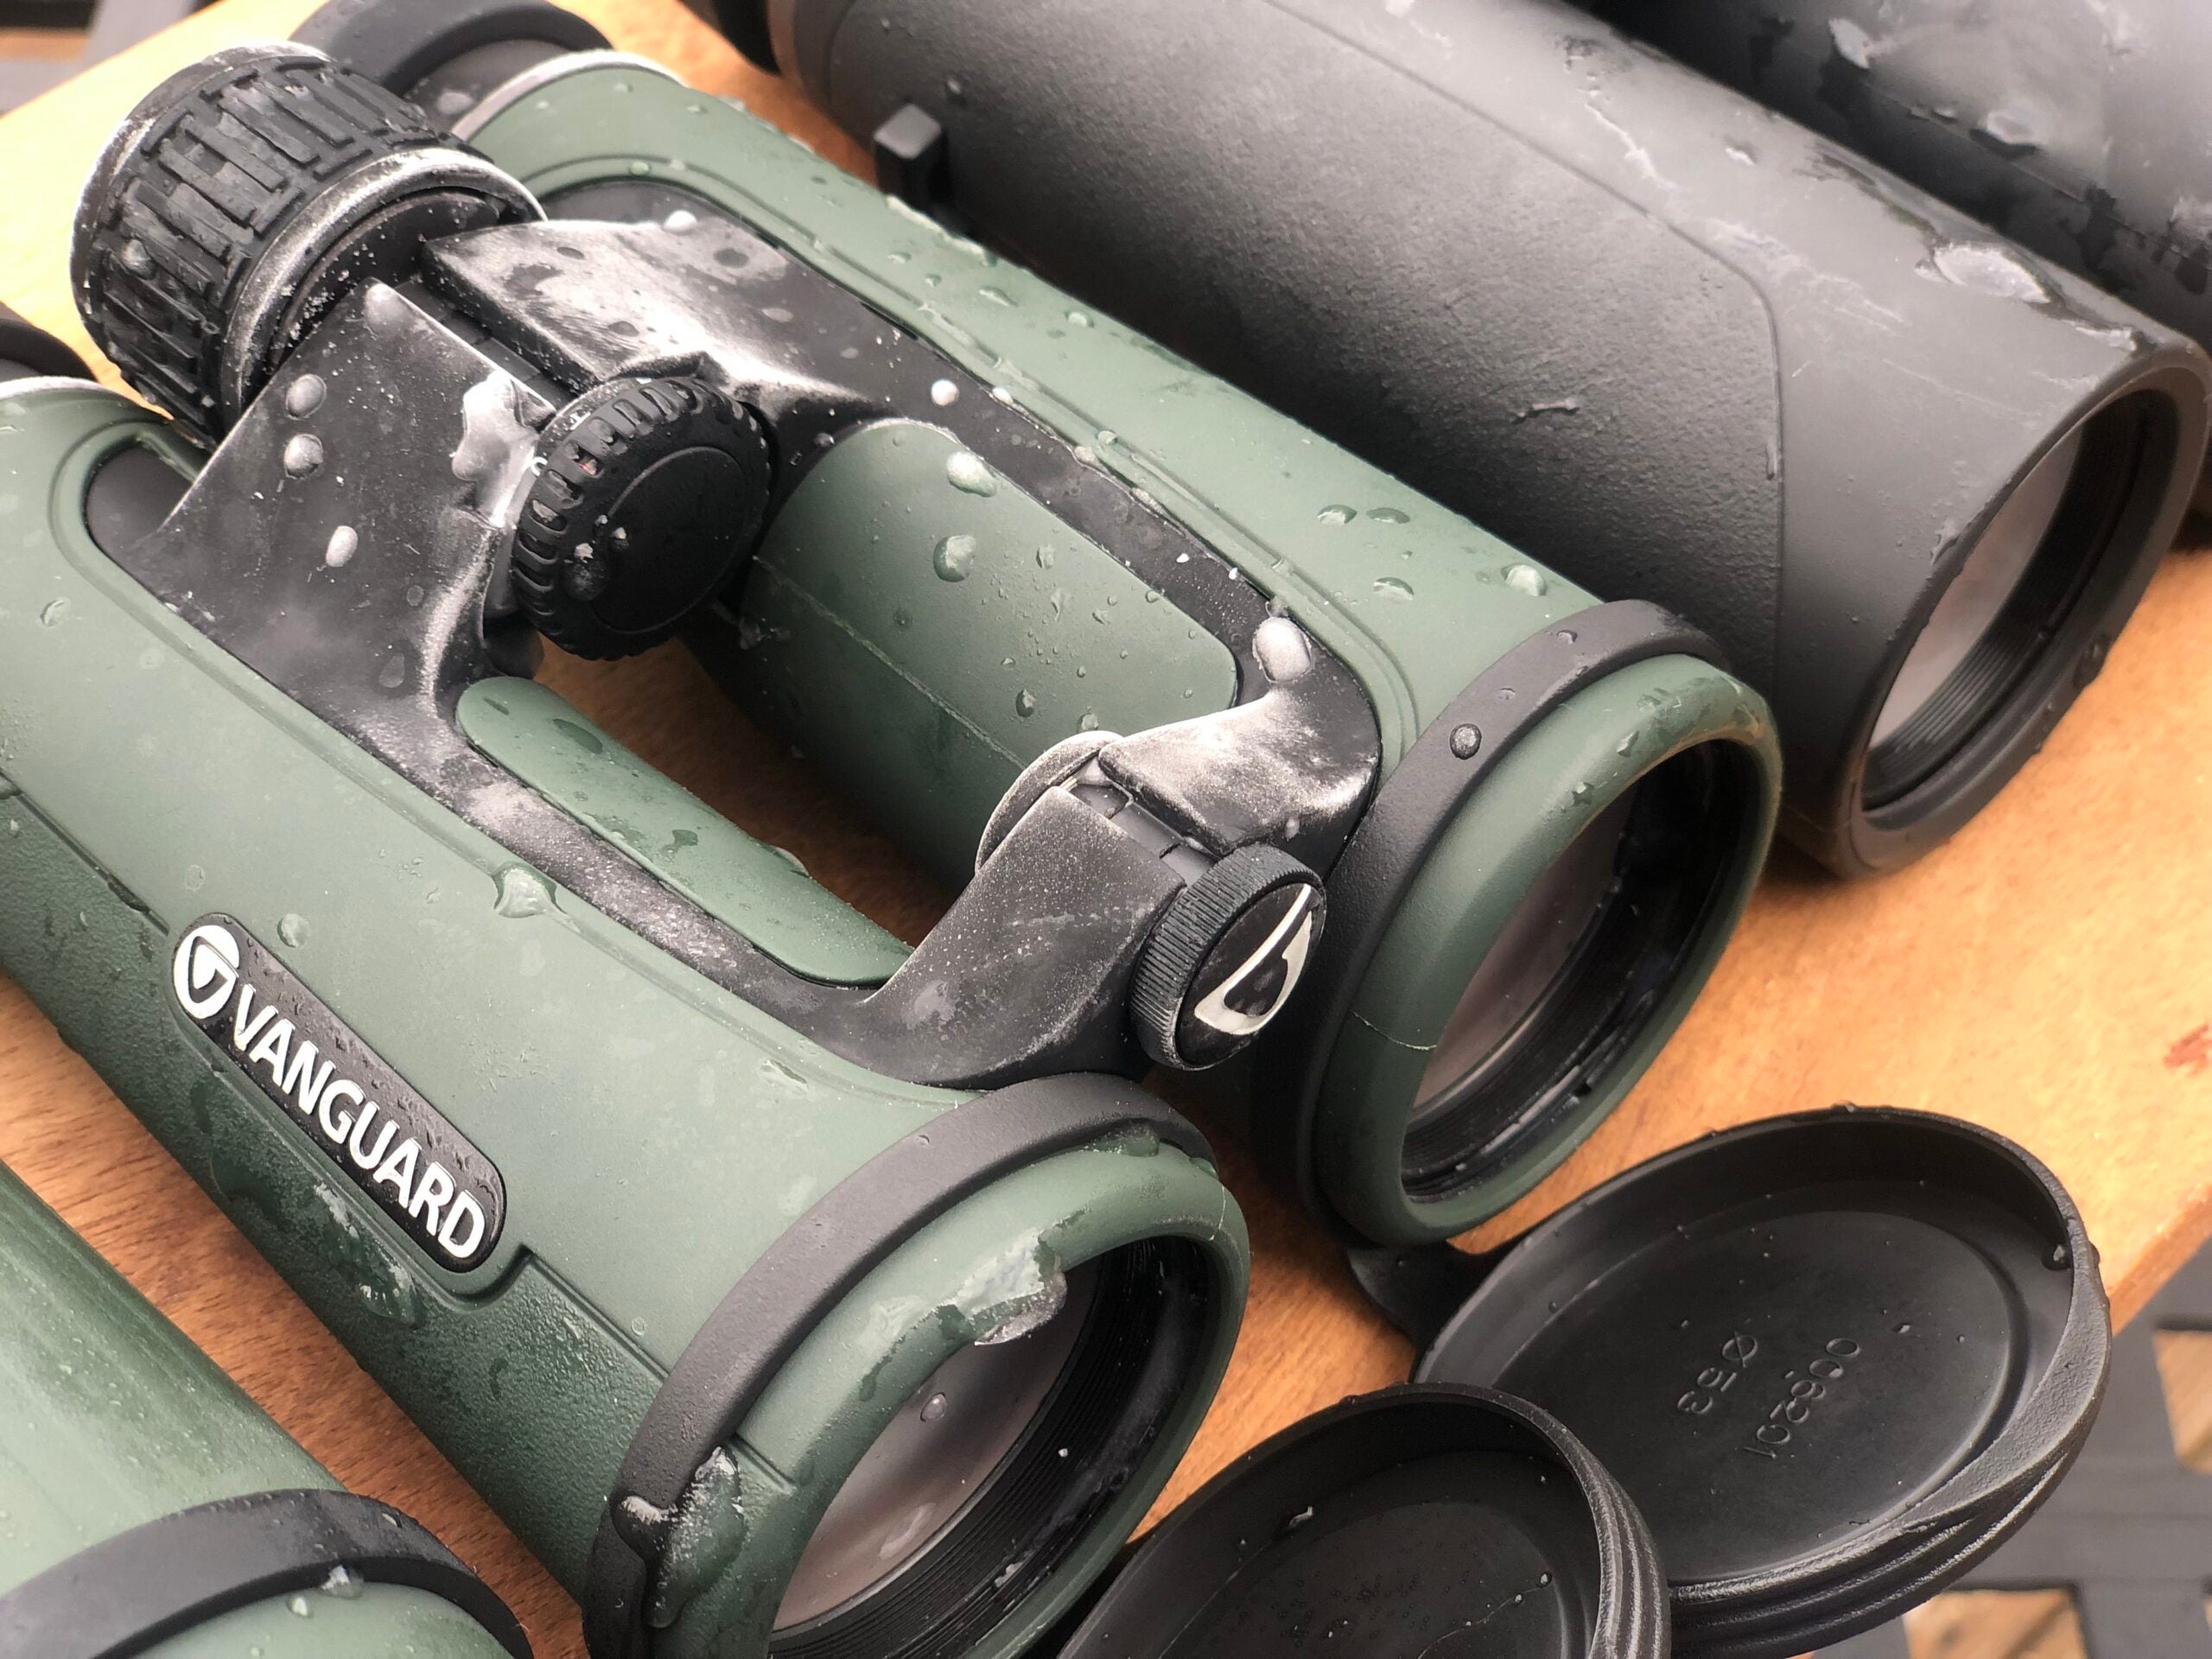 A frozen binocular sitting on a table with other binoculars.